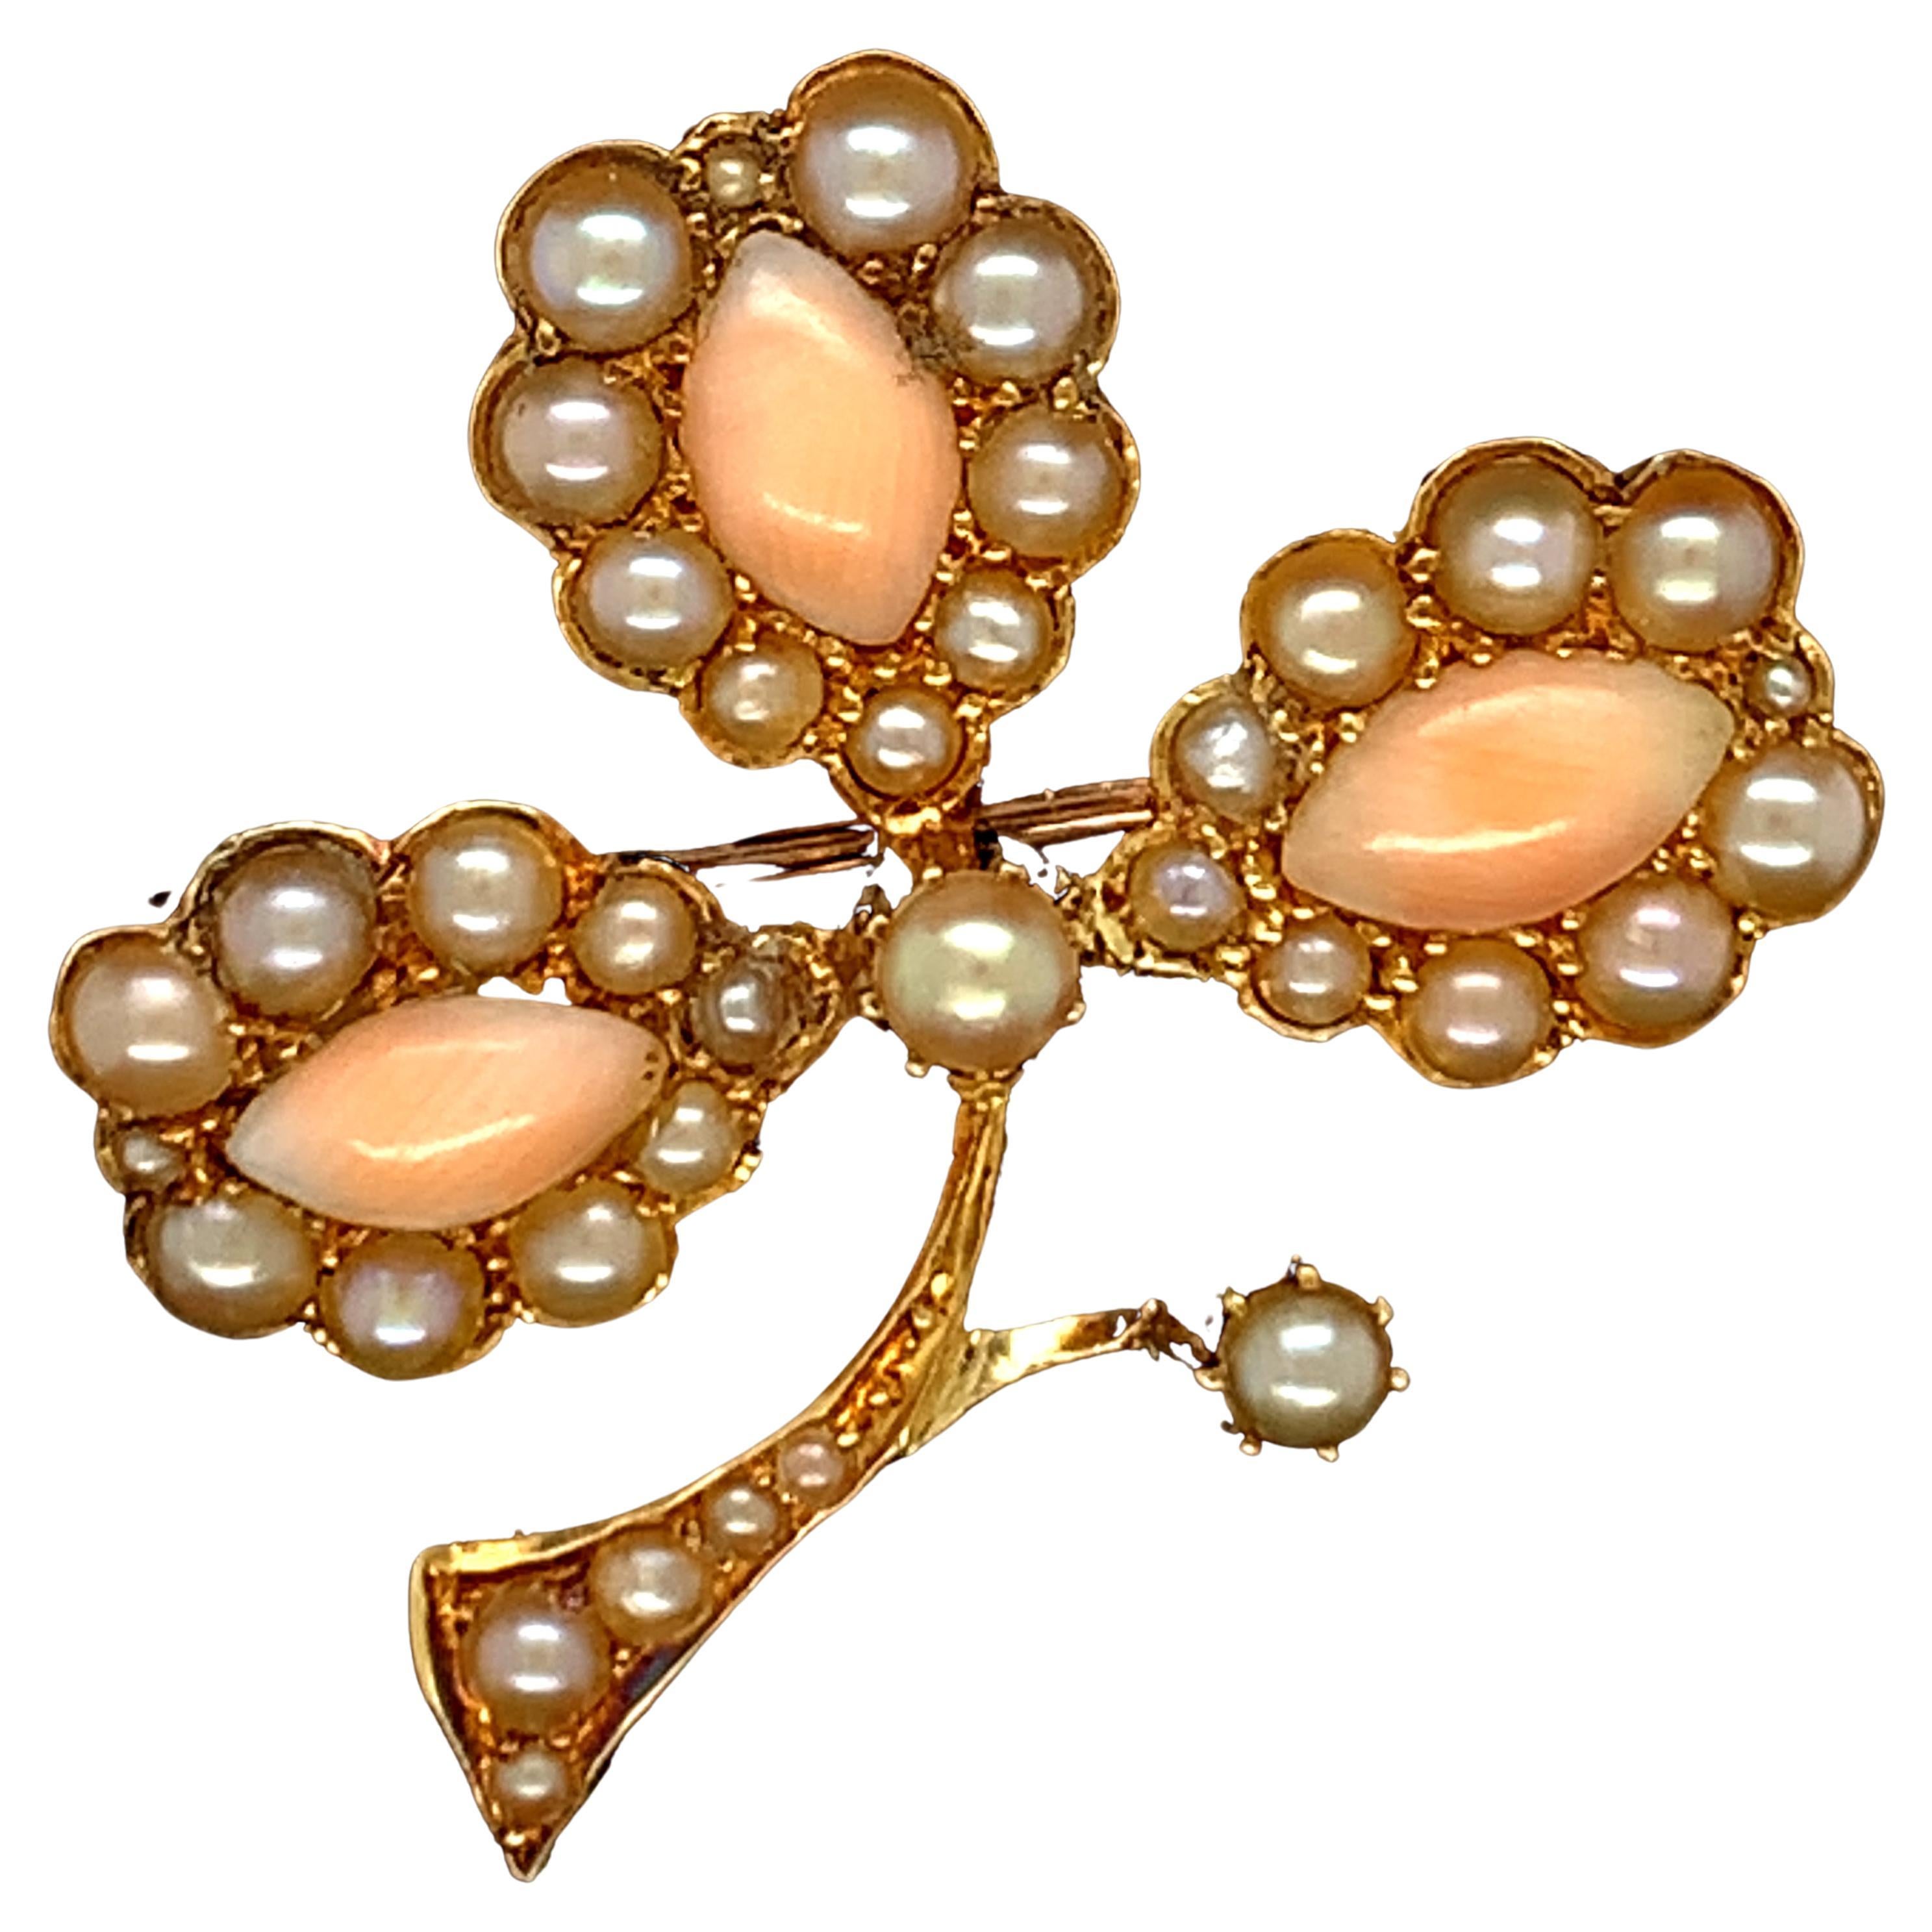 1930s Art Deco Coral and Pearl Brooch Pin